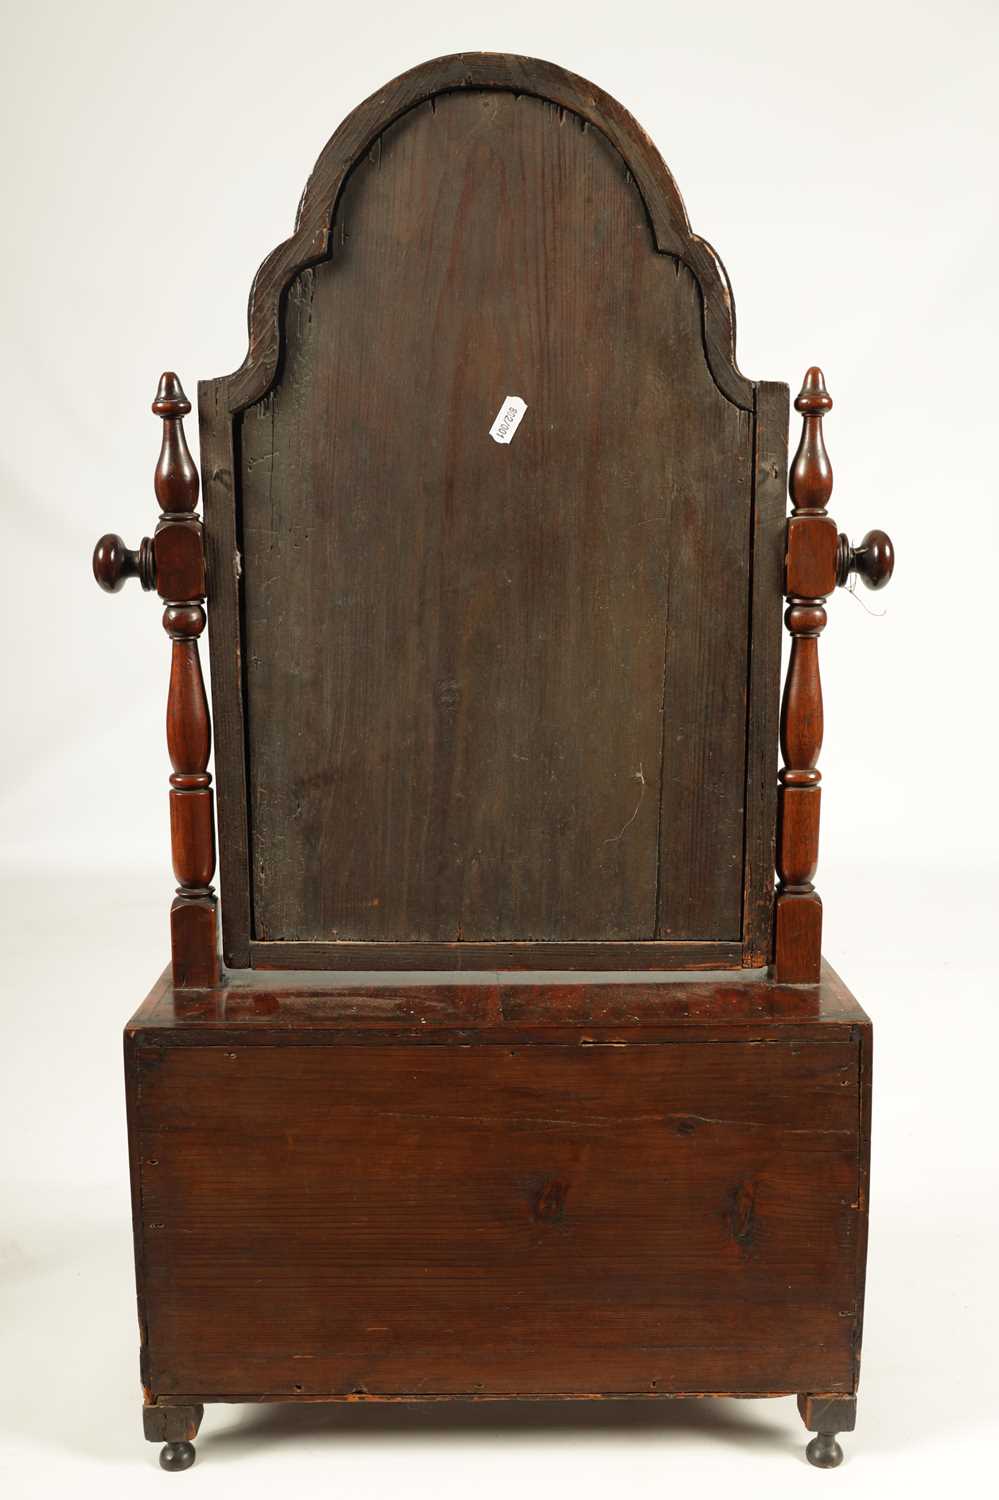 A WILLIAM AND MARY HERRING-BANDED FIGURED WALNUT TOILET MIRROR/BUREAU - Image 10 of 10